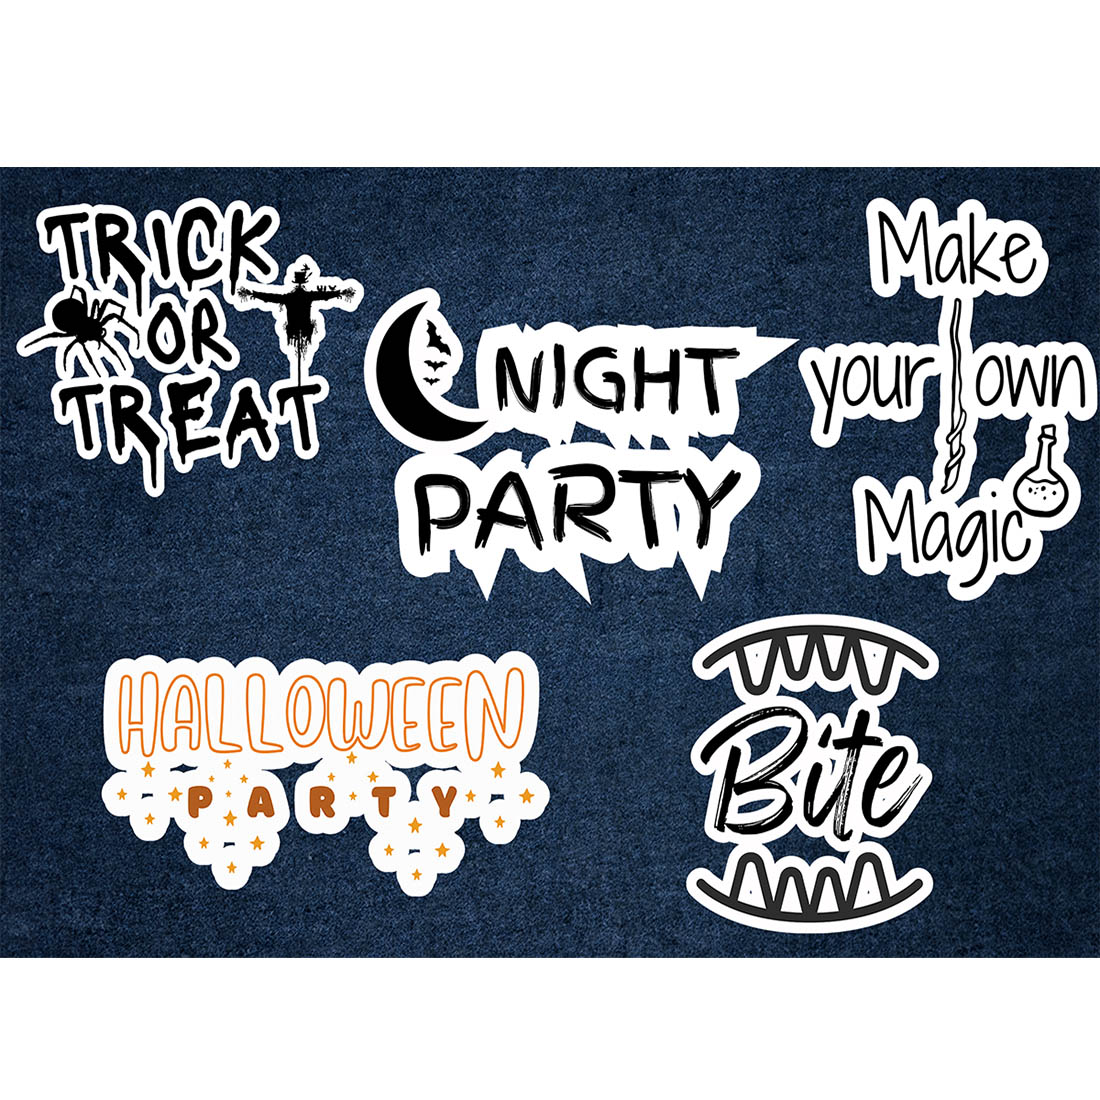 Scary Halloween Sticker Design Bundle cover image.